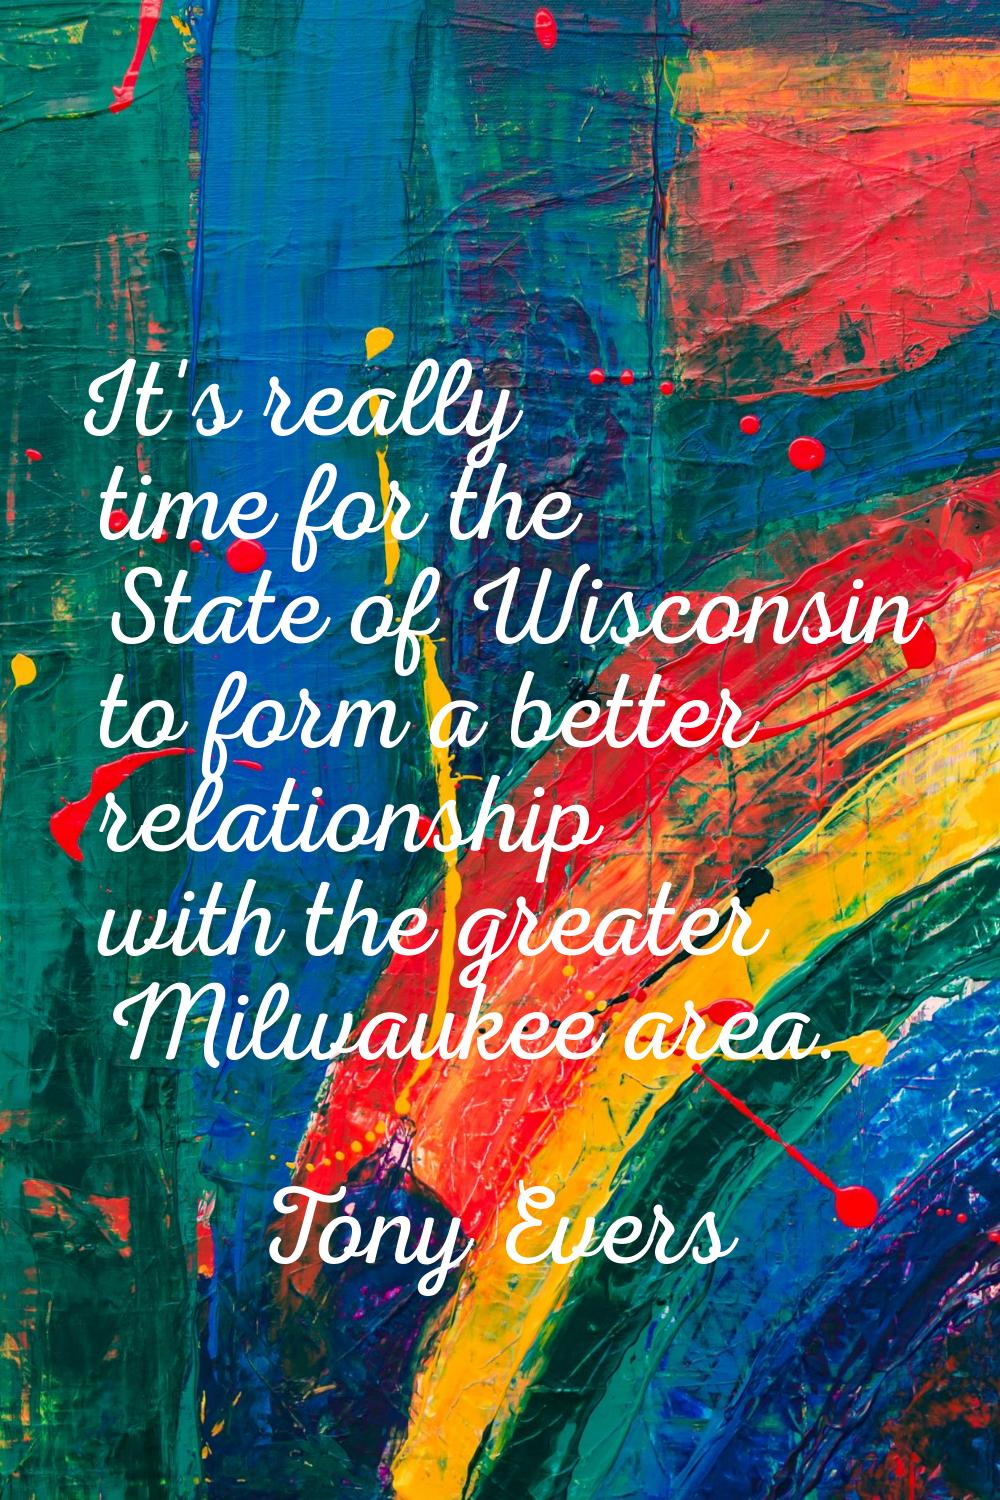 It's really time for the State of Wisconsin to form a better relationship with the greater Milwauke